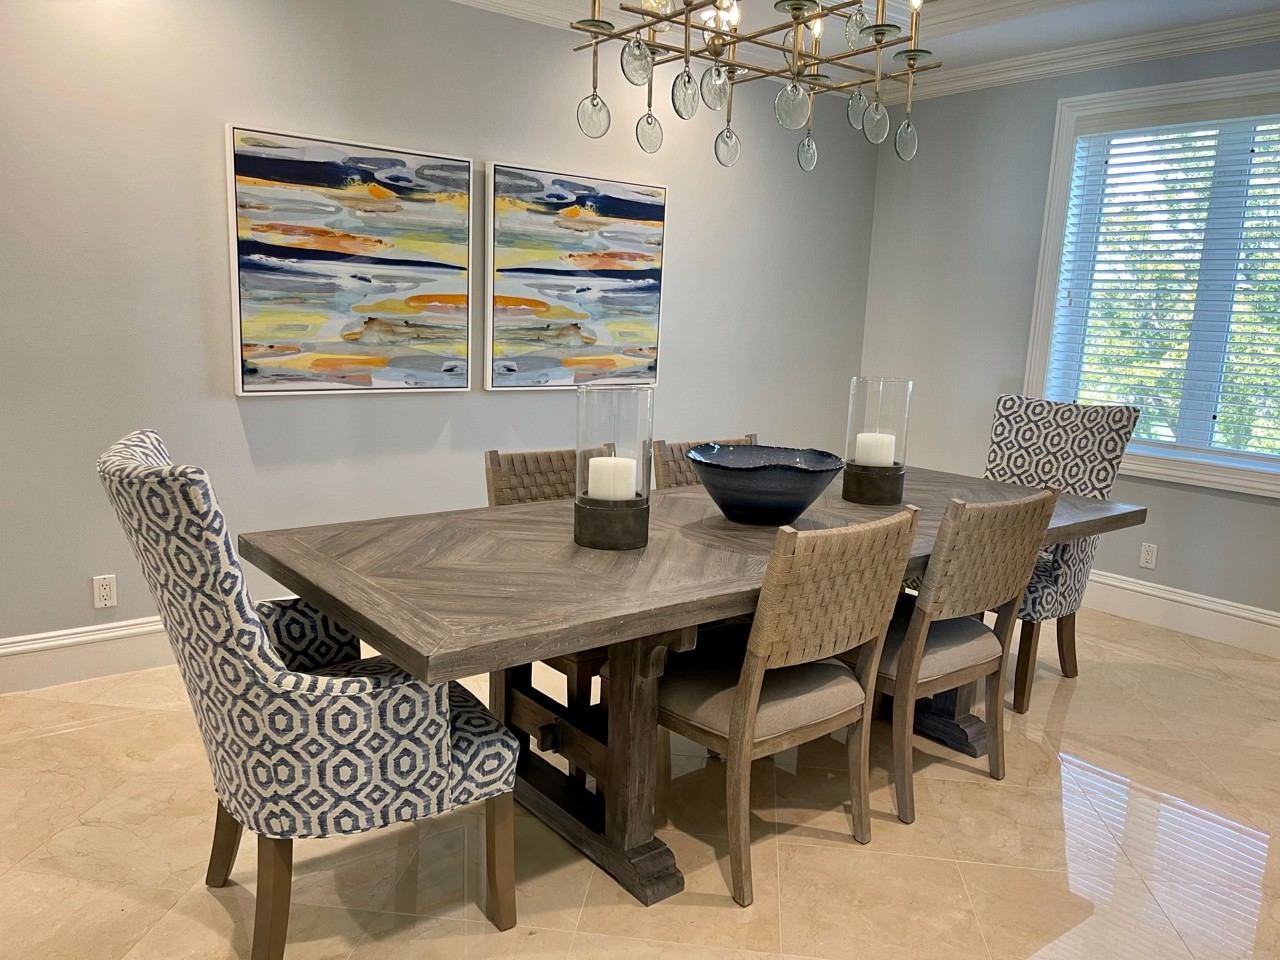 Our Favorite Dining Rooms by Angela Neel Interiors